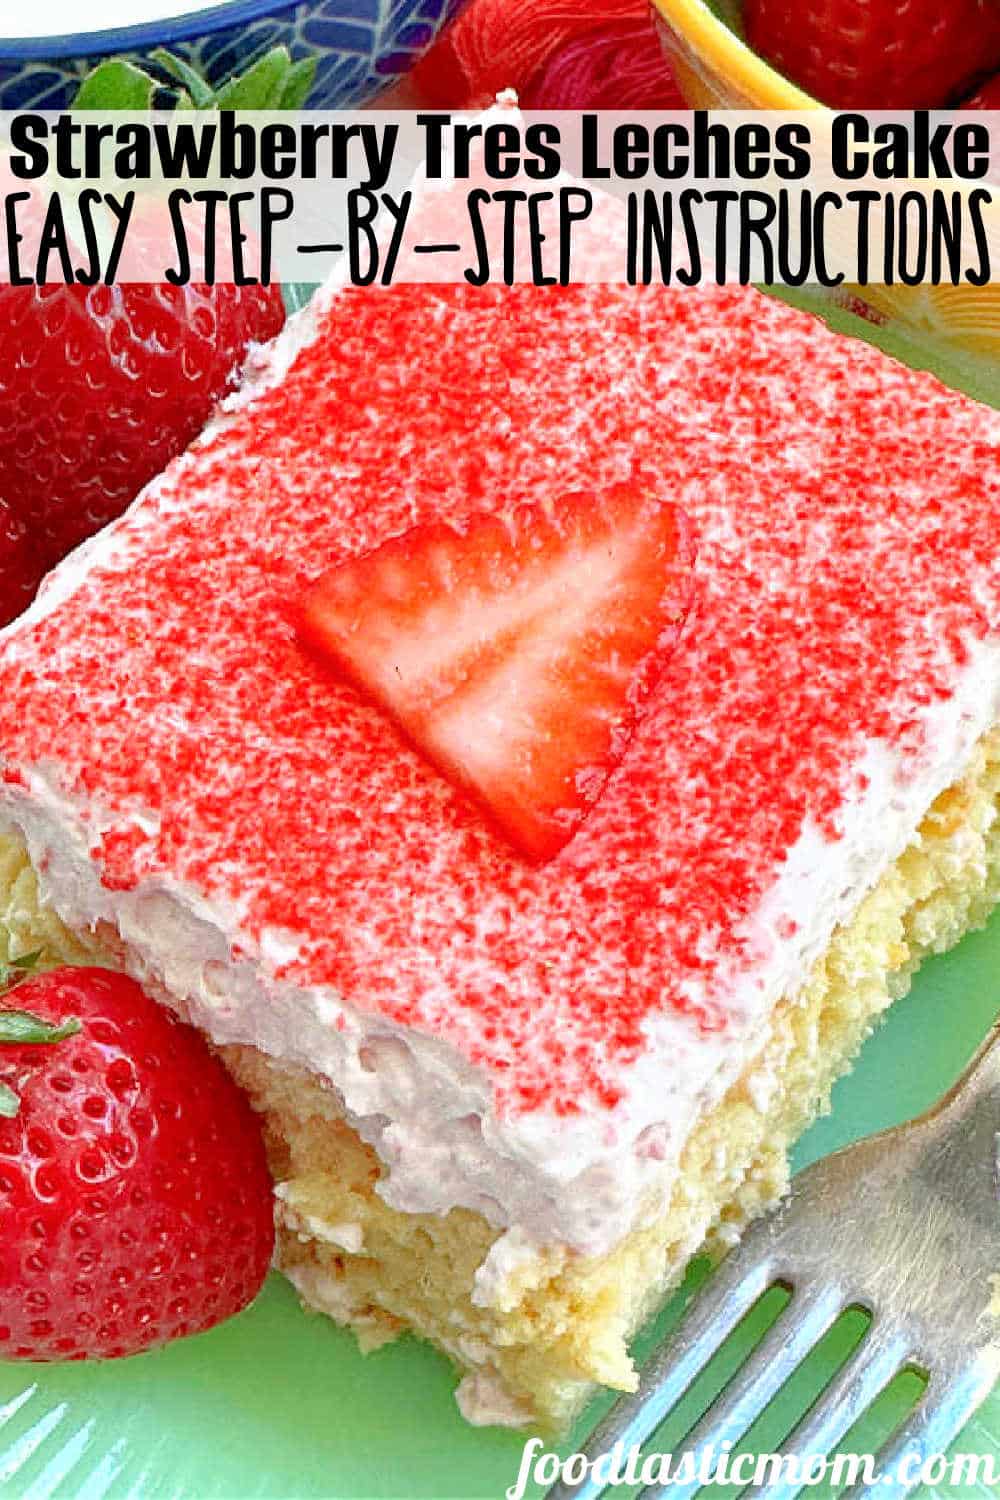 My recipe for Strawberry Tres Leches Cake includes a homemade sponge cake, three milks and three different types of strawberries. via @foodtasticmom